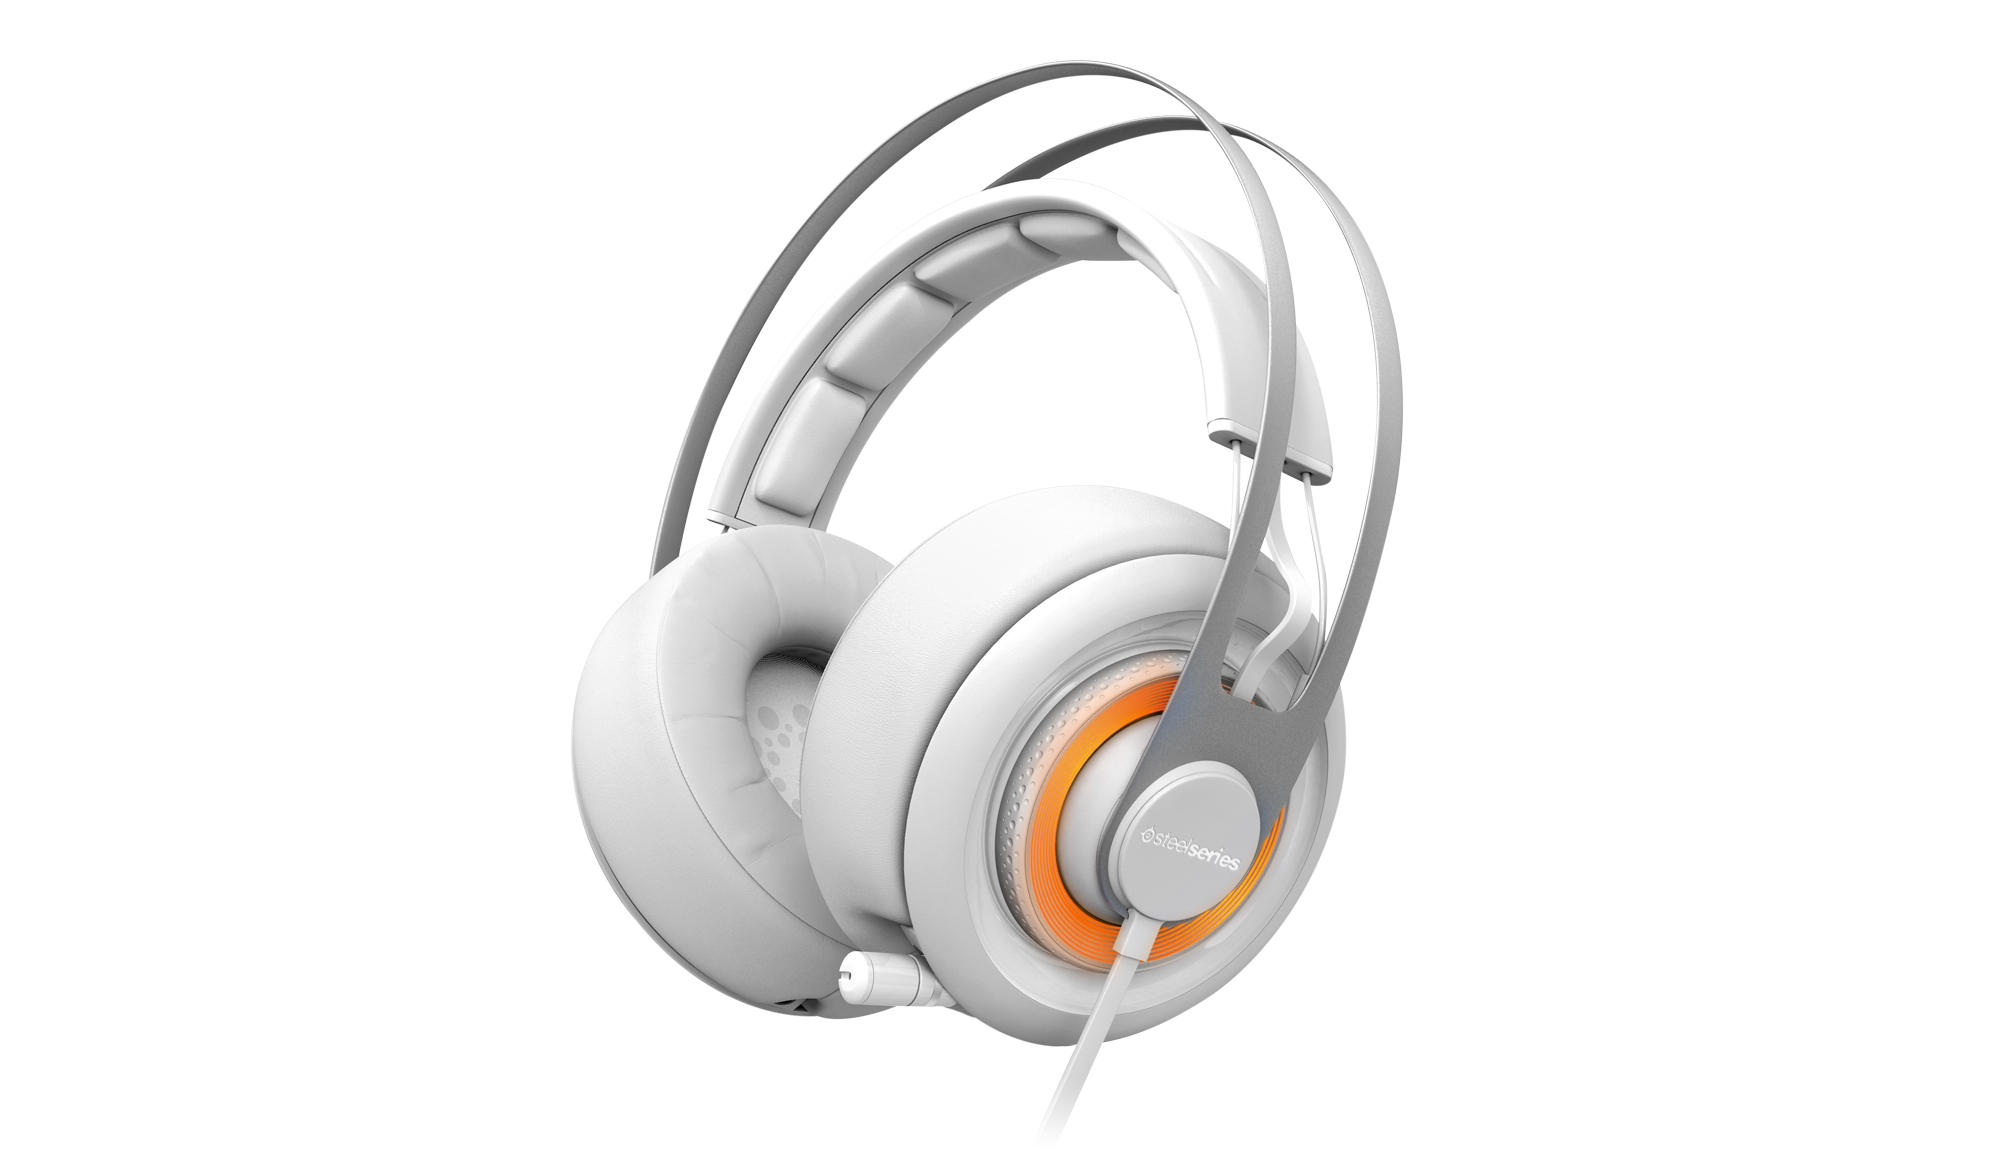 And the IF product design award goes to… Siberia Elite!